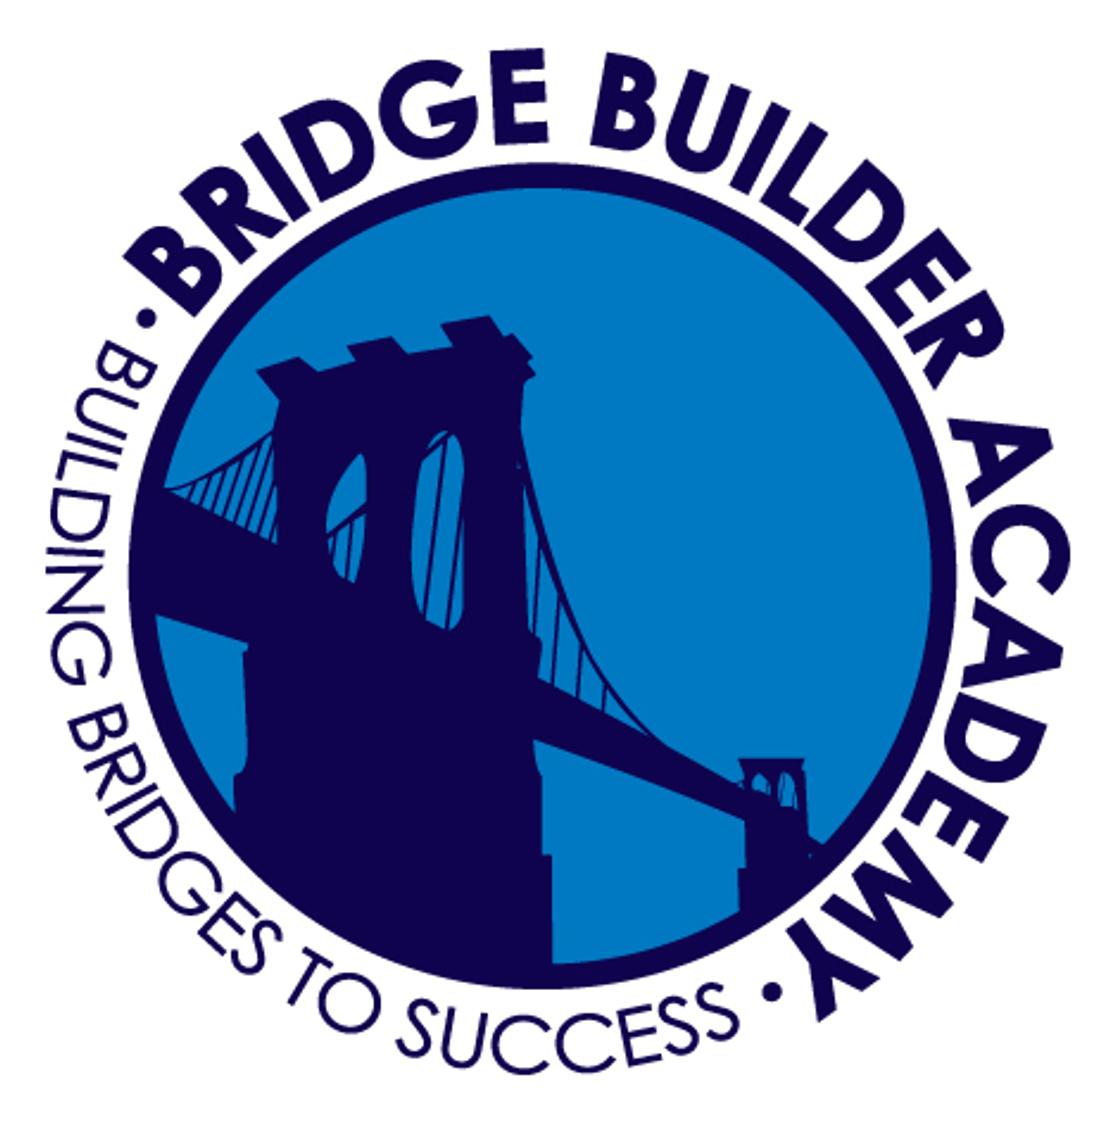 Bridge Builder Academy Photo - We build bridges to success daily. Our mission is to assist students with unique learning styles and challenges to maximize their academic potential through individualized and customized educational plans.